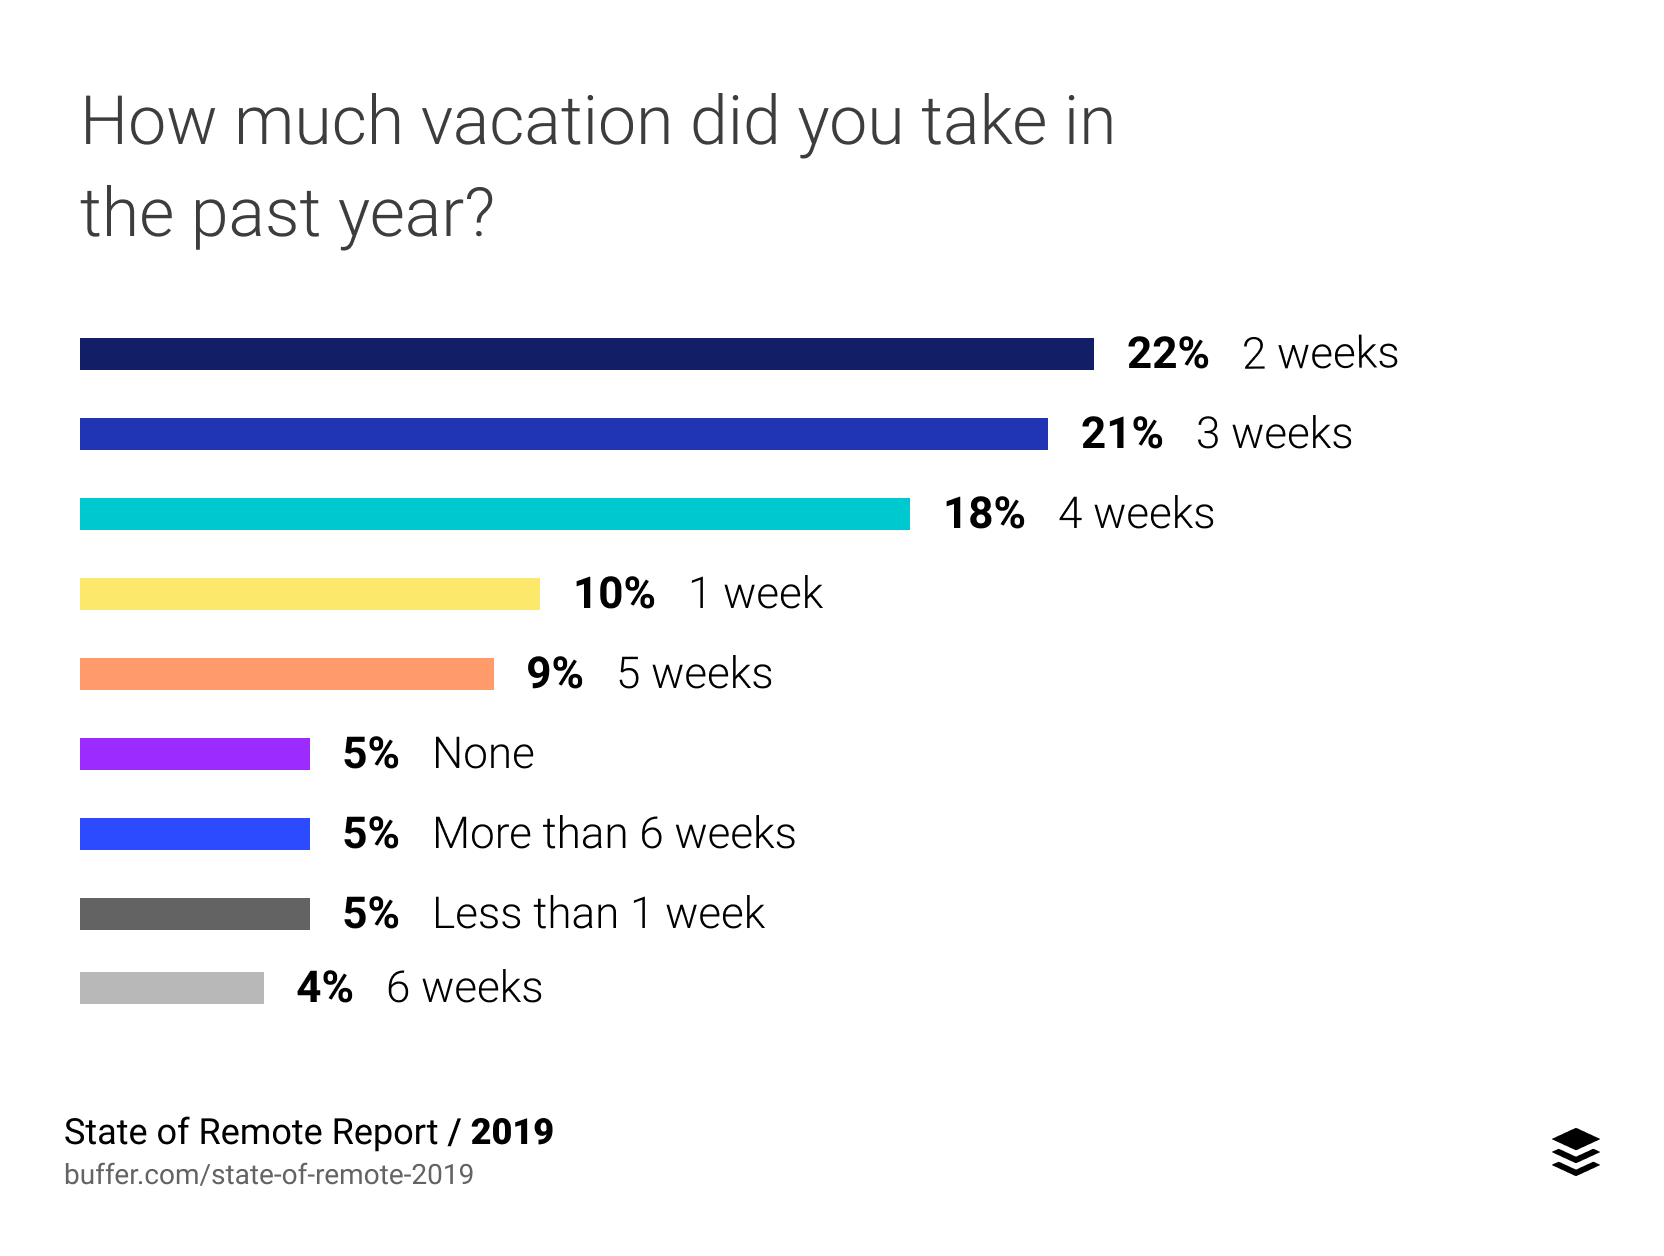 How much vacation did you take in the past year?